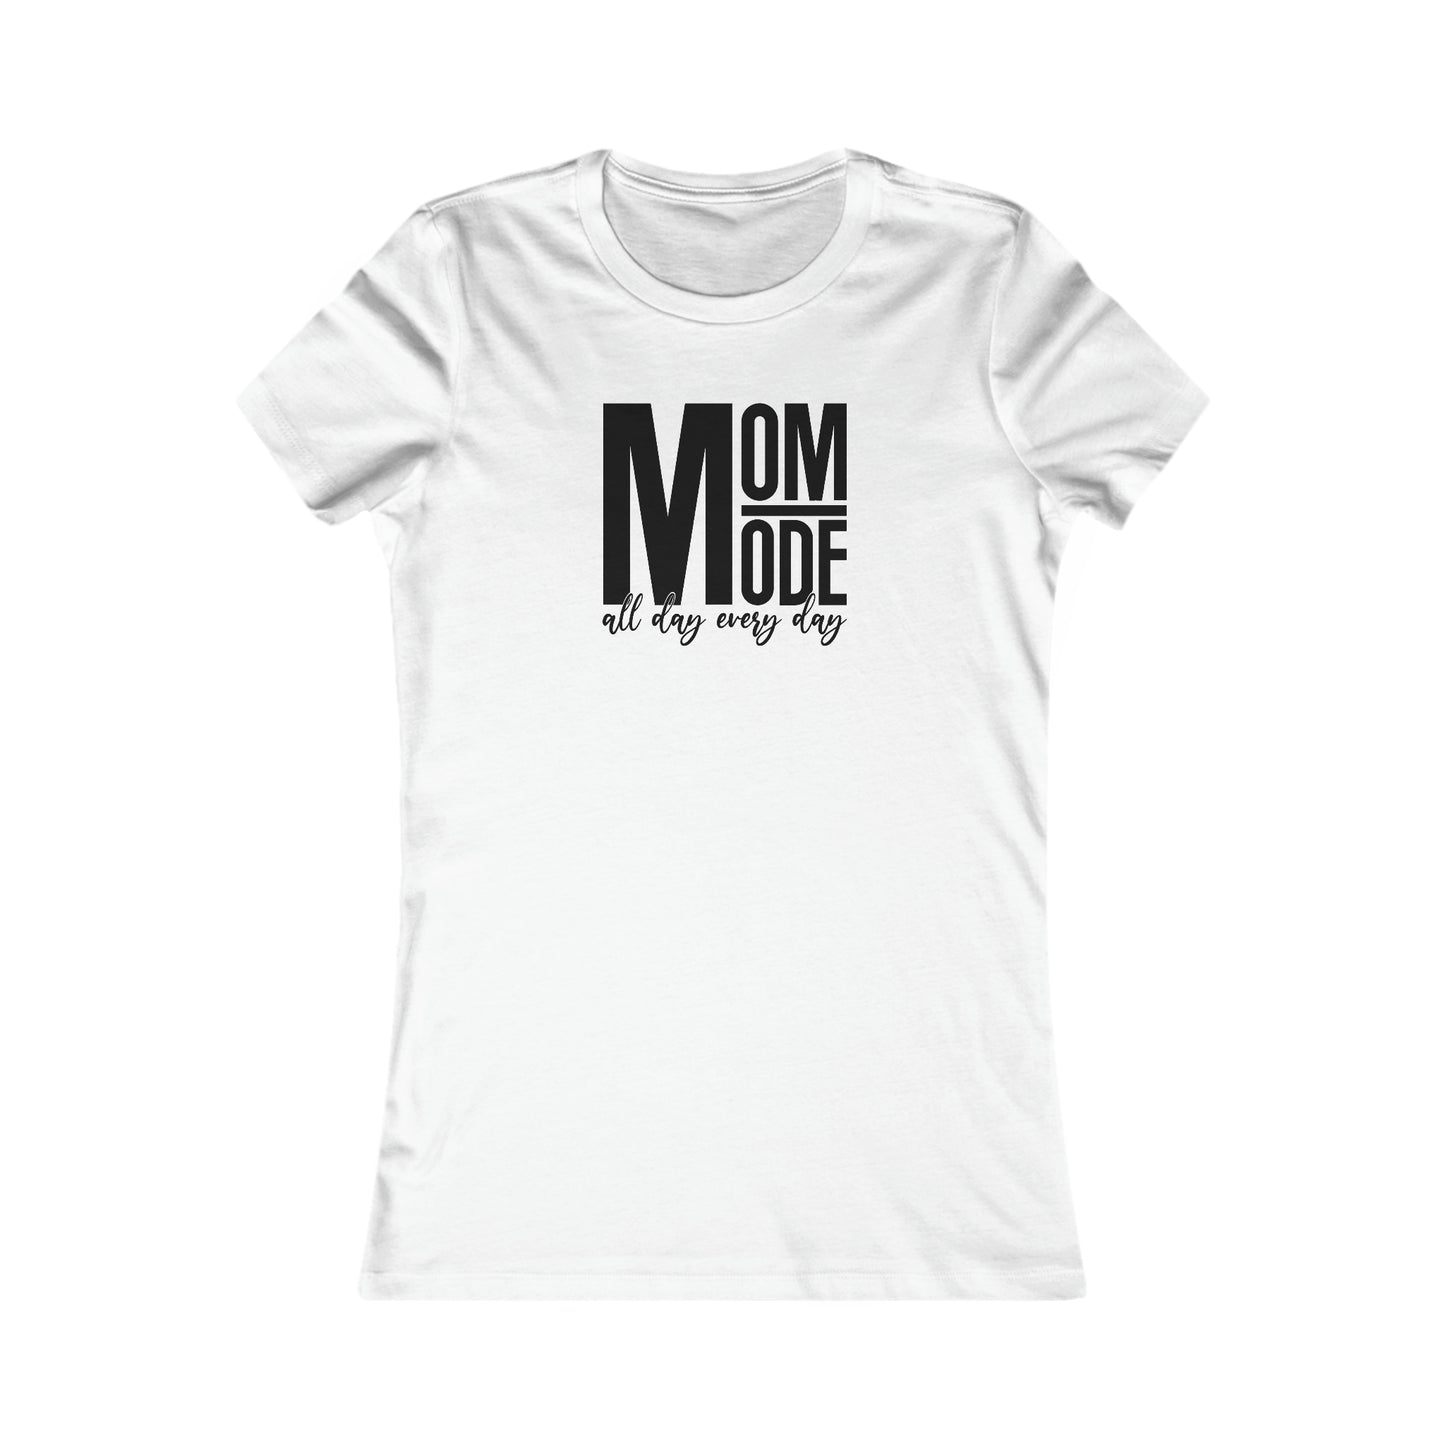 MOM Mode - All Day Every Day - Best Mom - Celebrate Mom - Strong Woman - Mom Humor - Women's Favorite Tee